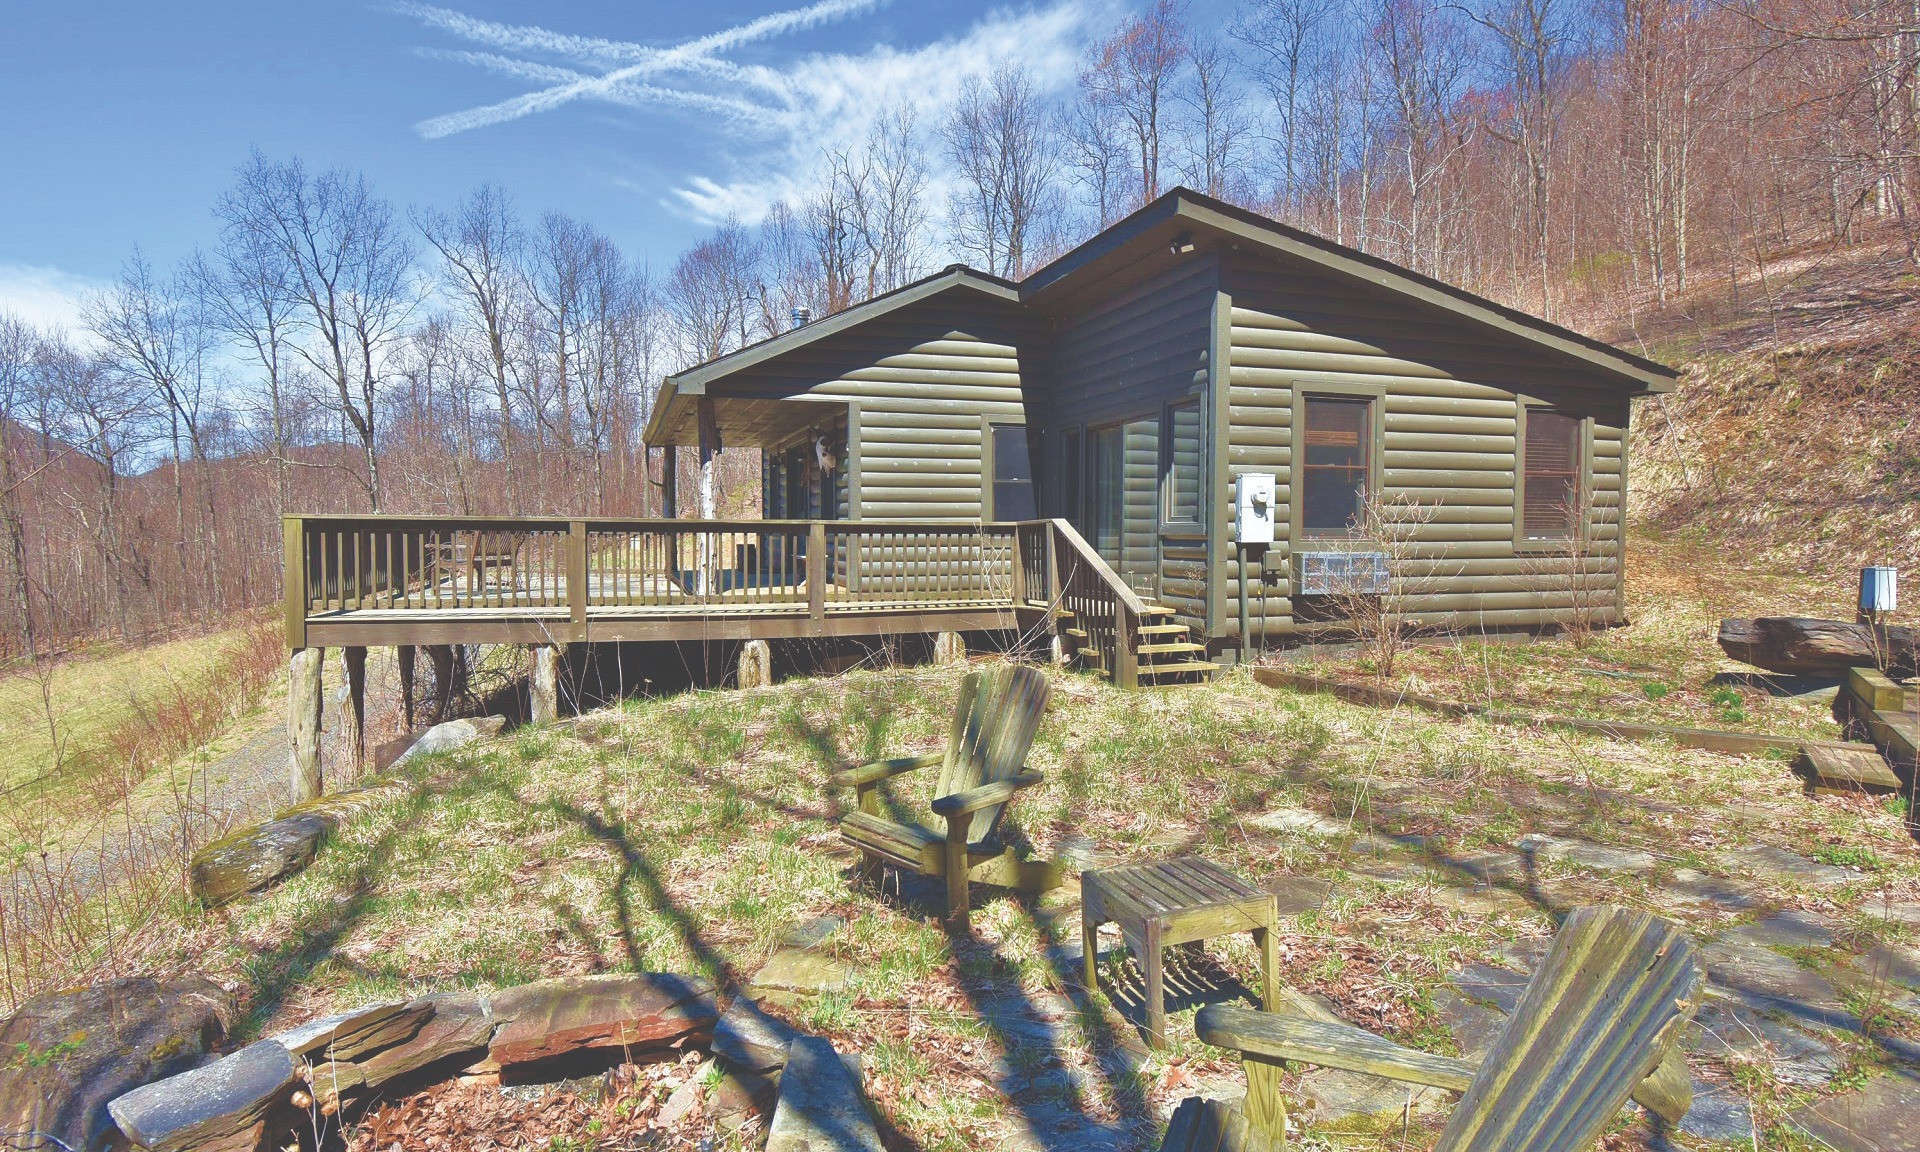 Enjoy outstanding sunsets and long range mountain views from the deck of this sweet cabin hidden away on a 110 acre setting in the Todd area of Southern Ashe County.